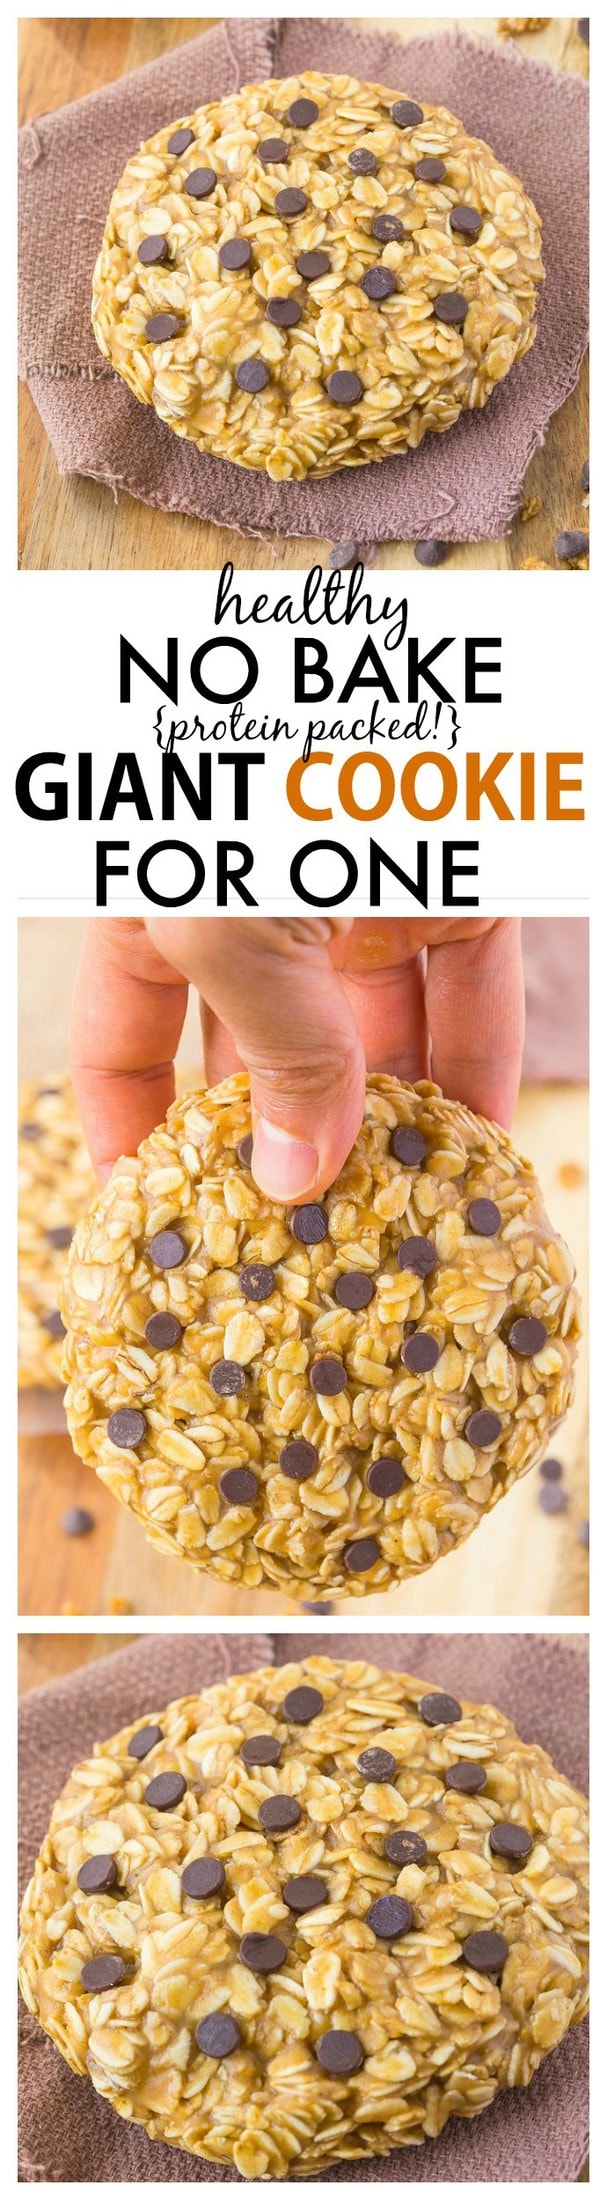 Healthy No Bake Giant Cookie for ONE recipe that is vegan and gluten free